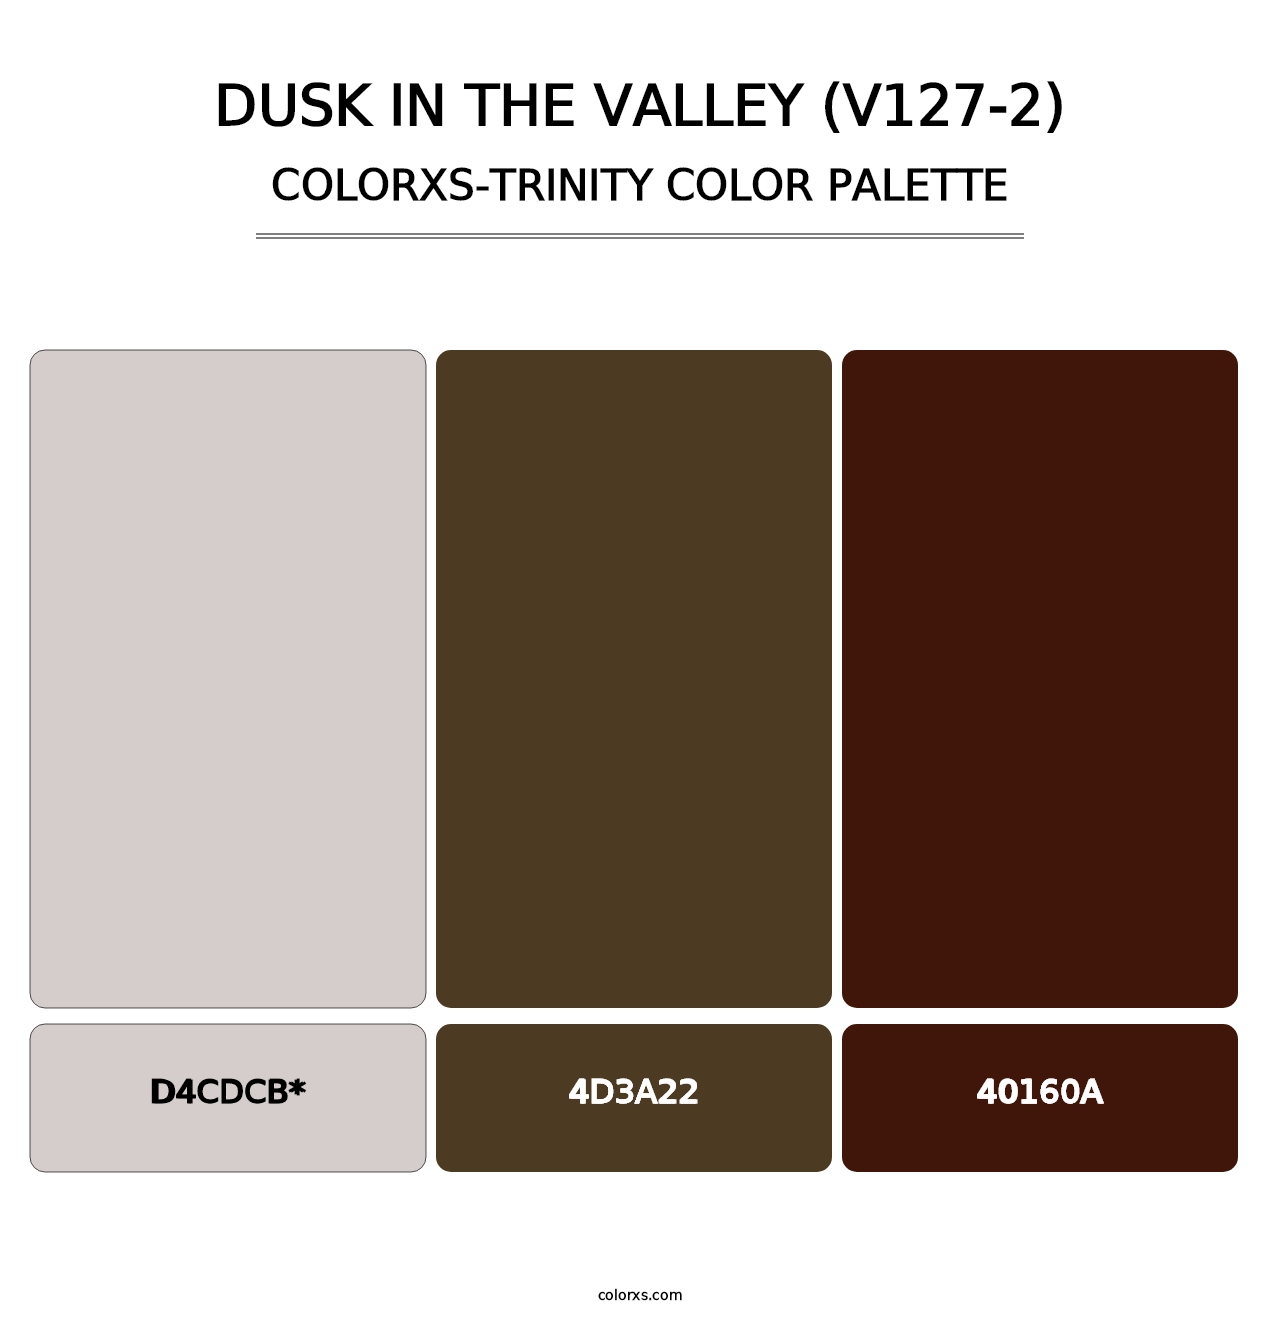 Dusk in the Valley (V127-2) - Colorxs Trinity Palette